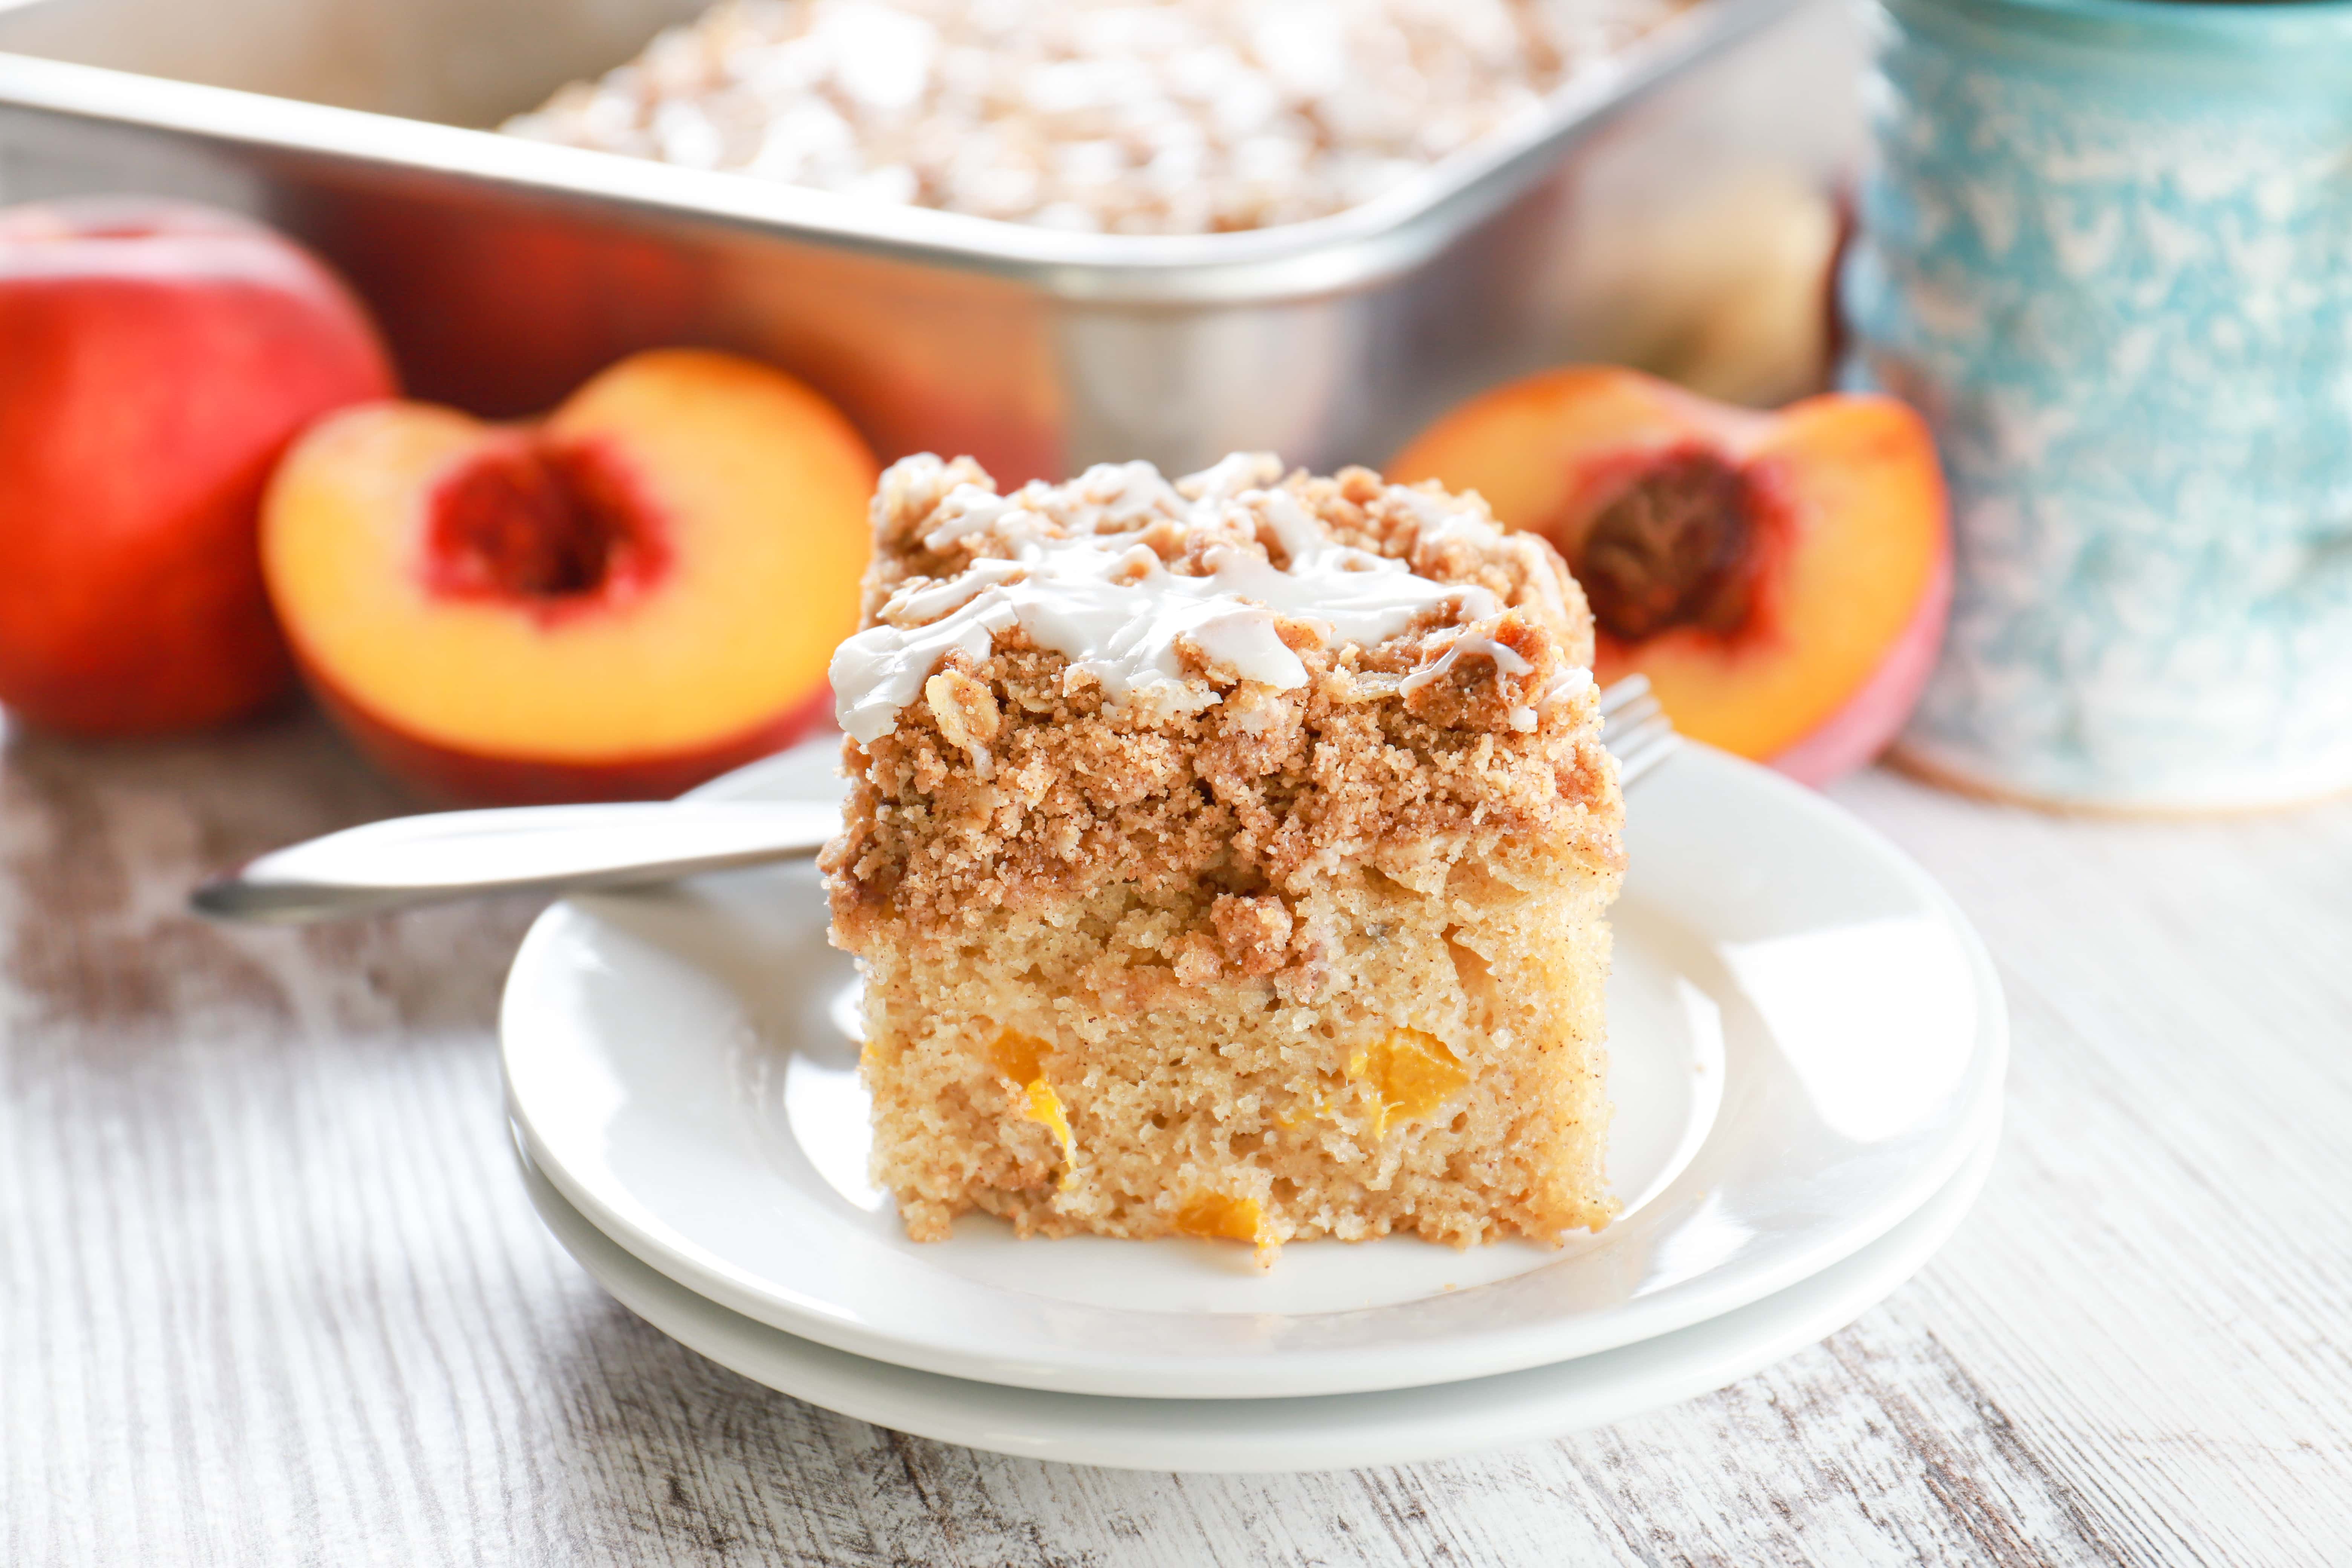 Up close side view of a piece of peach coffee cake on a small white plate.